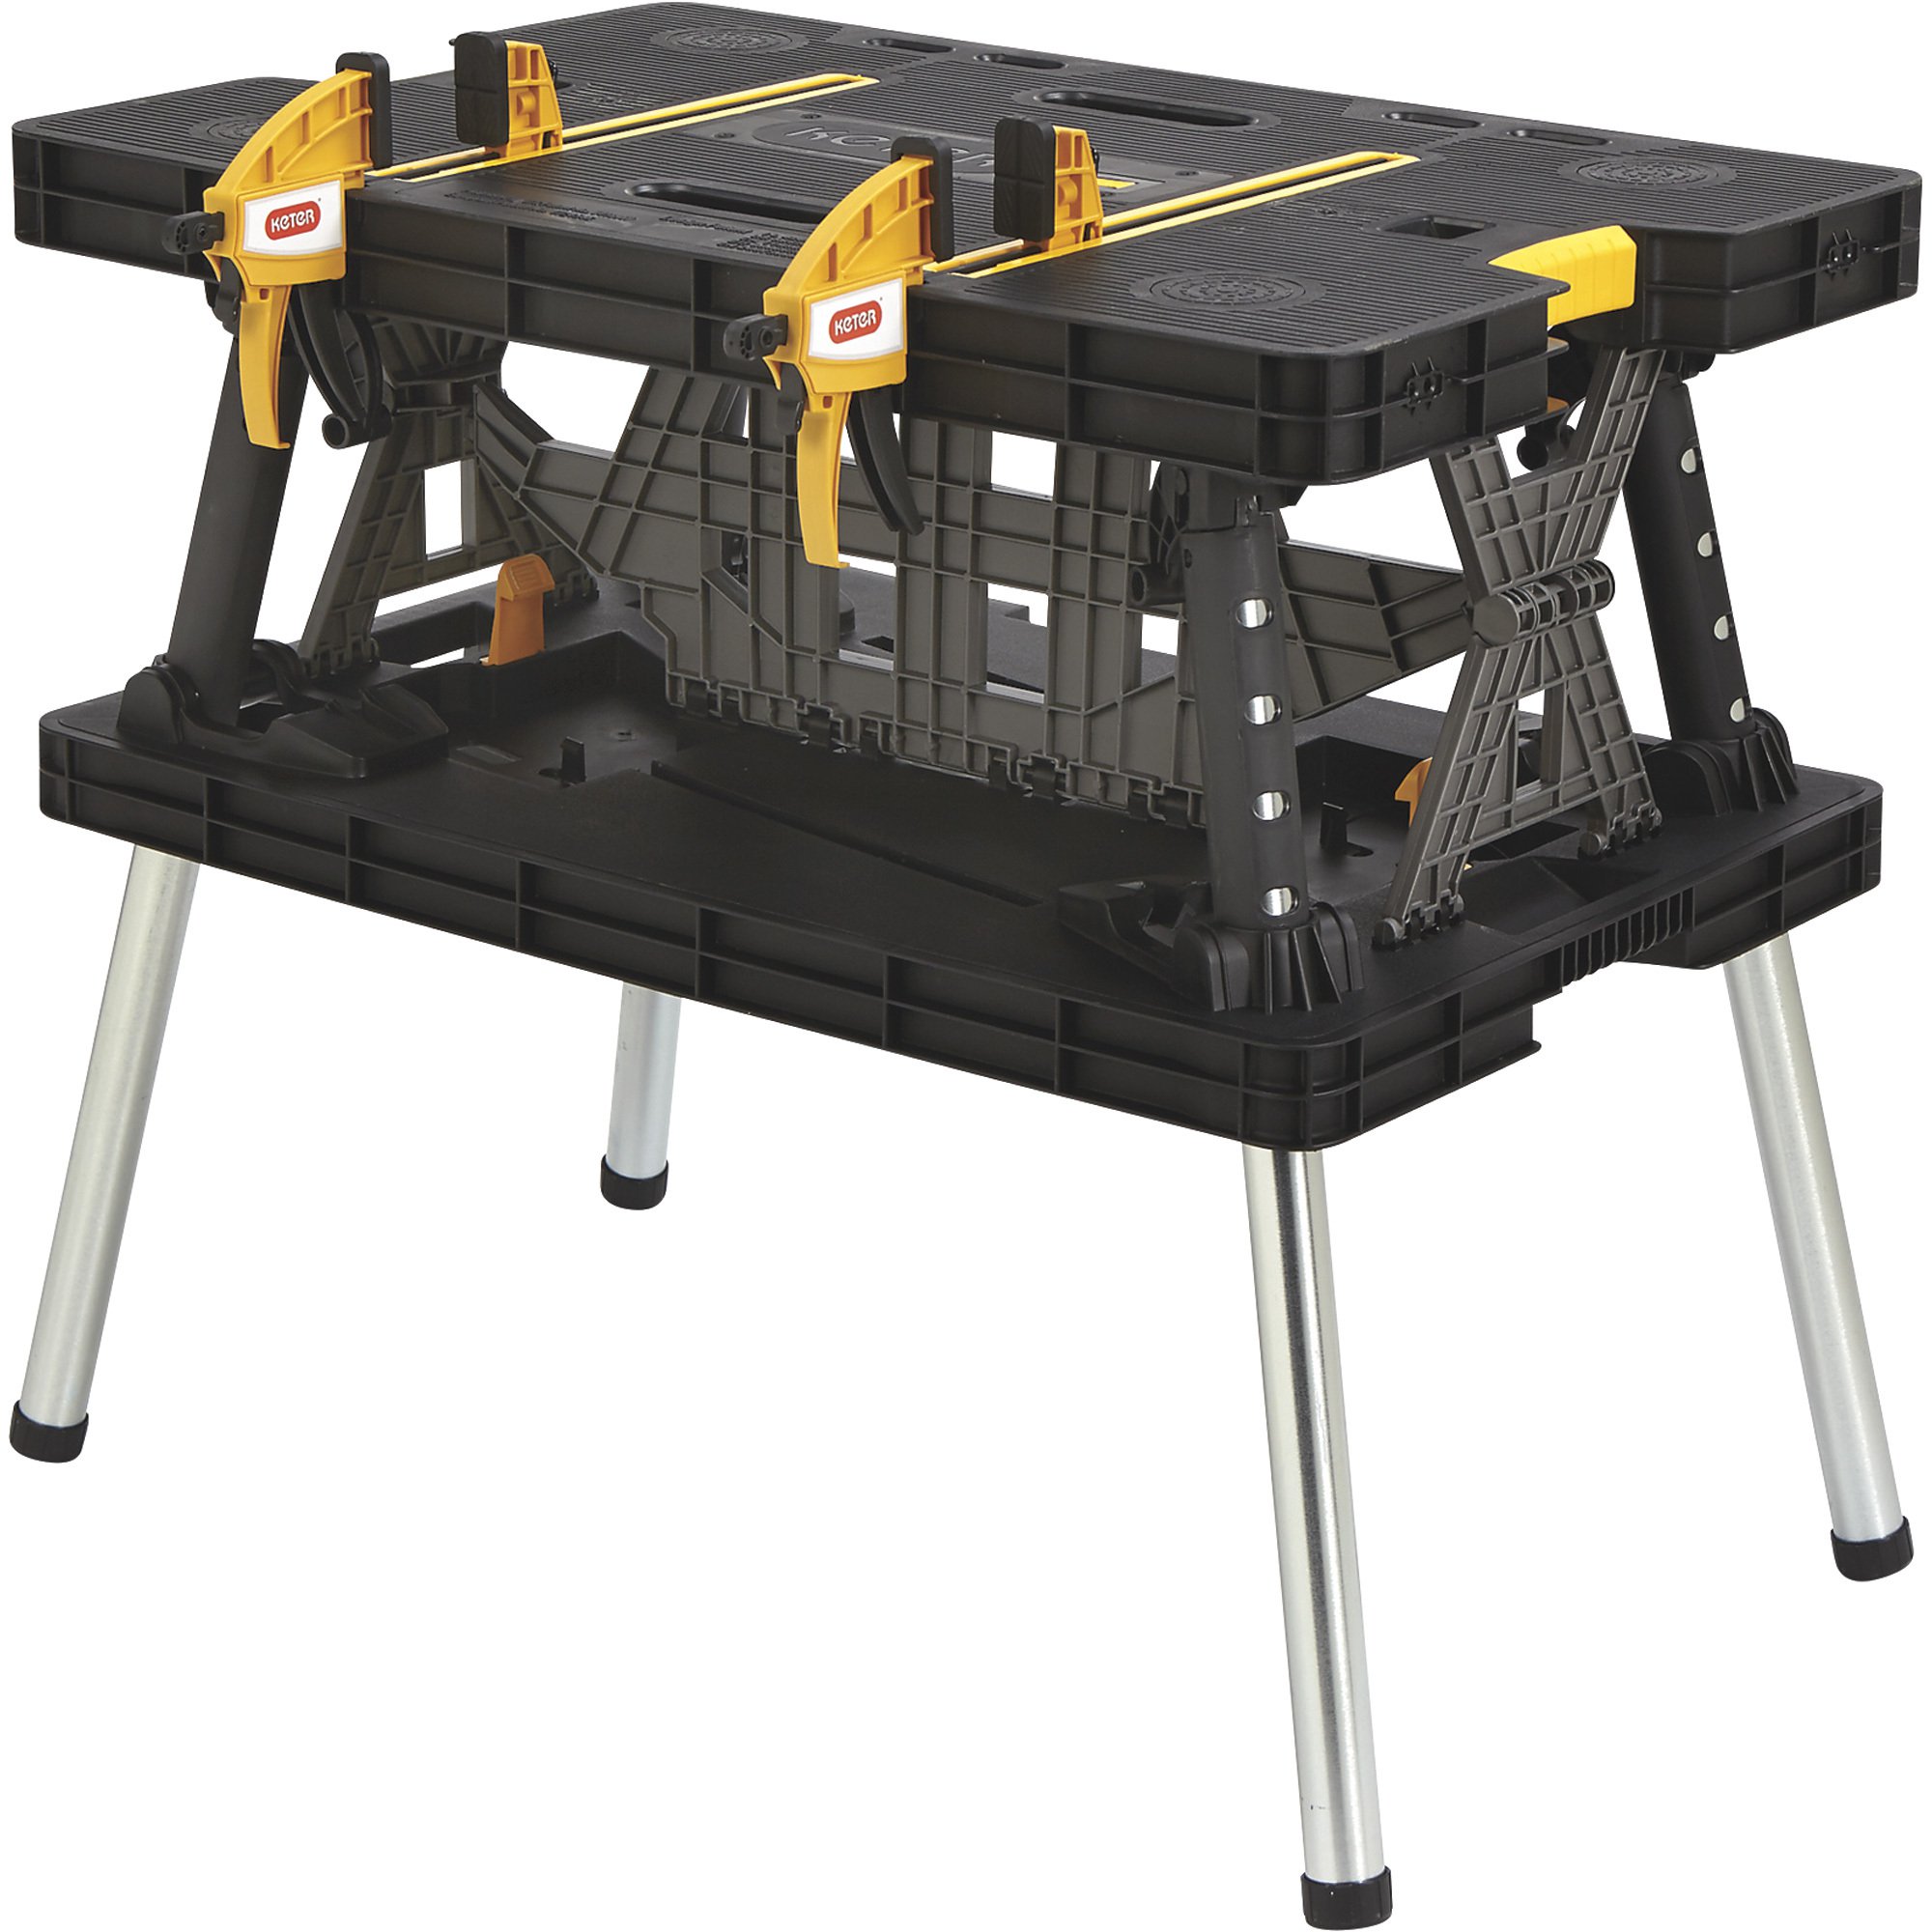 FREE SHIPPING — Keter Folding Work Table — 33 1/2in.L x 21 3/4in.W x ...